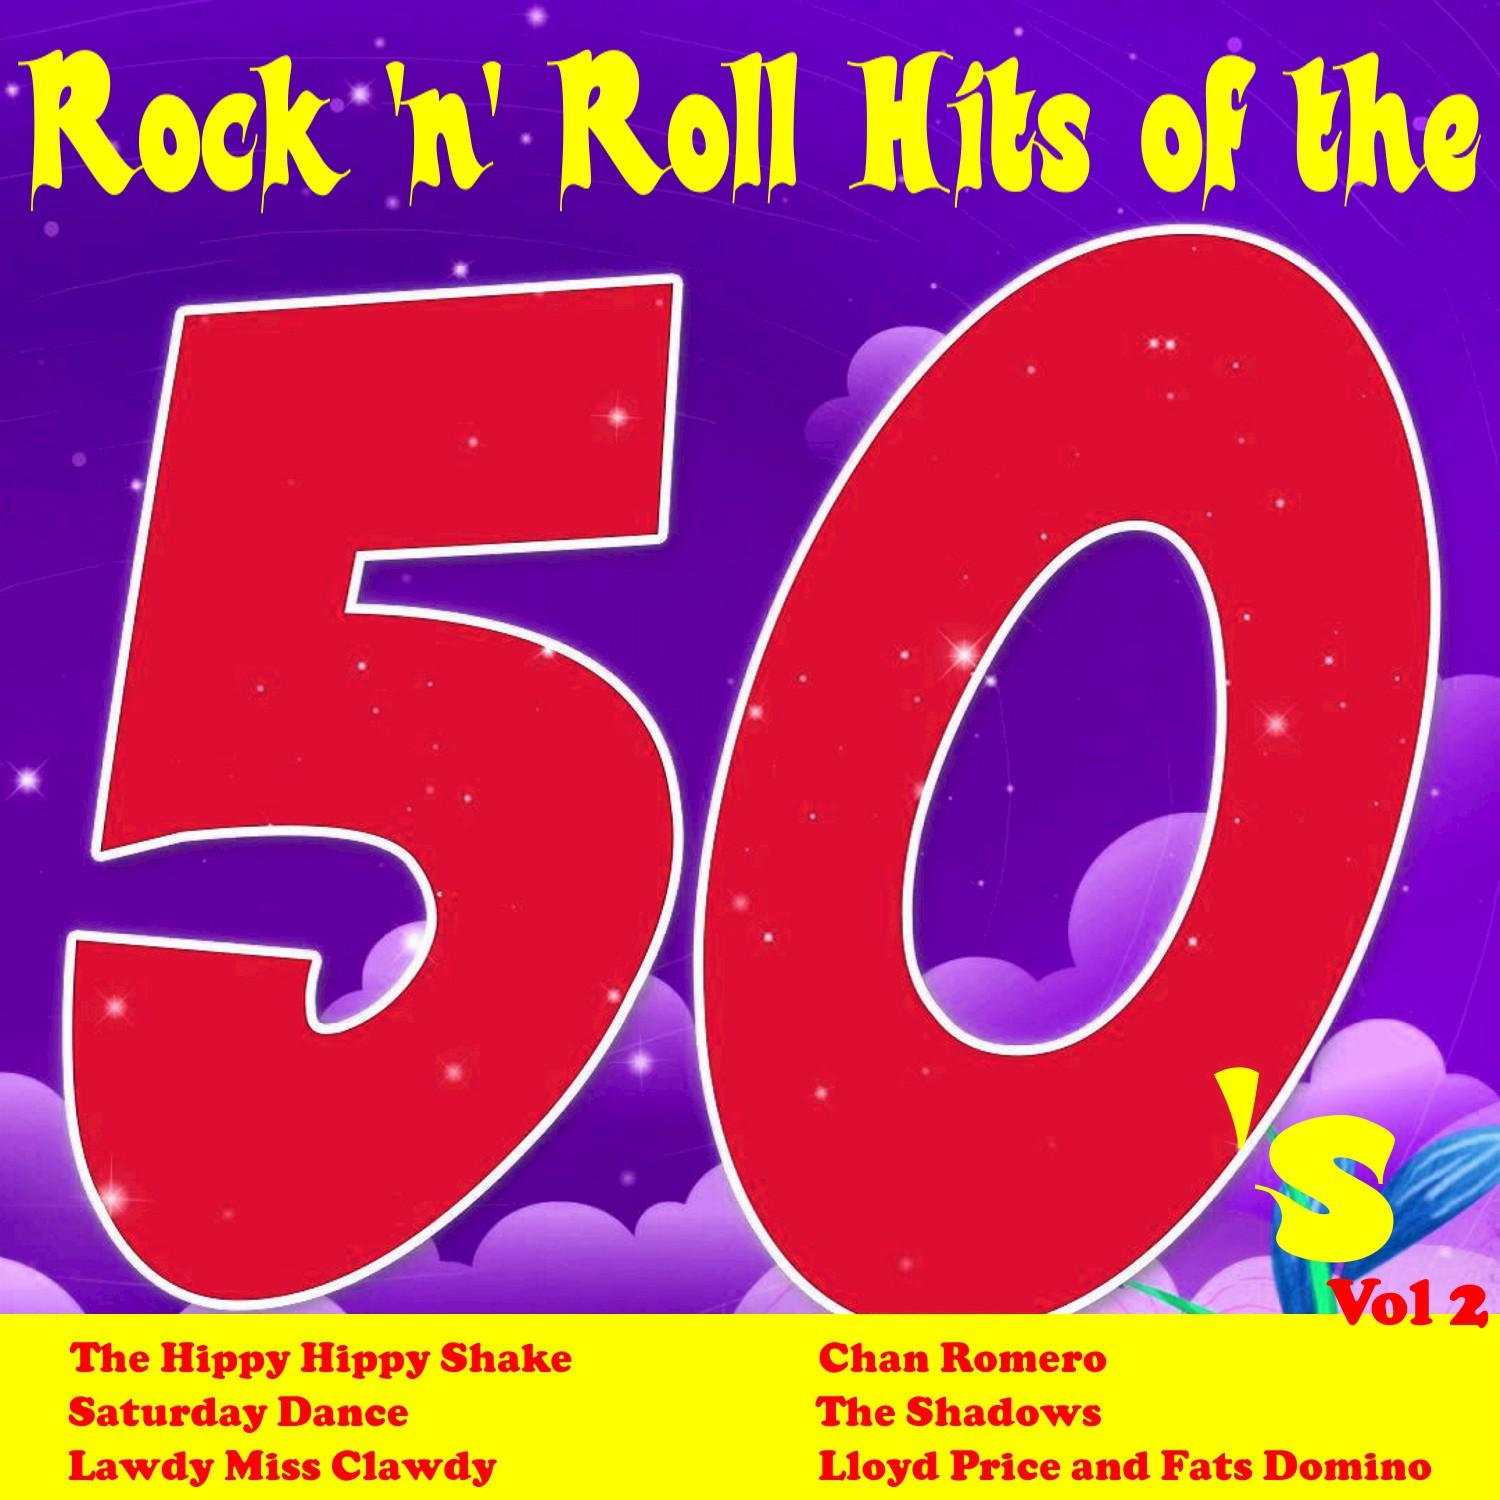 Rock 'n' Roll Hits of the 50's, Vol. 2